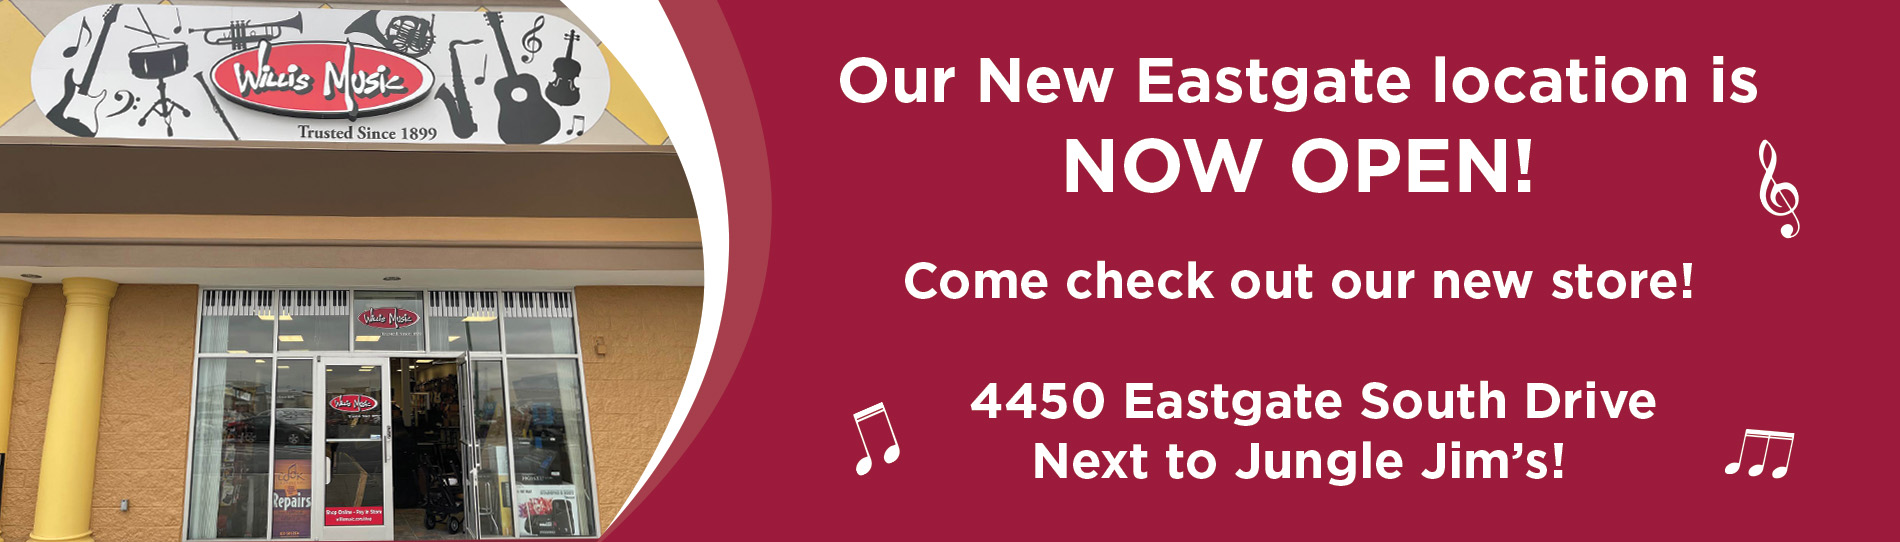 The new Eastgate Location is open. Come visit next to Jungle Jim's - 4450 Eastgate South Dr.